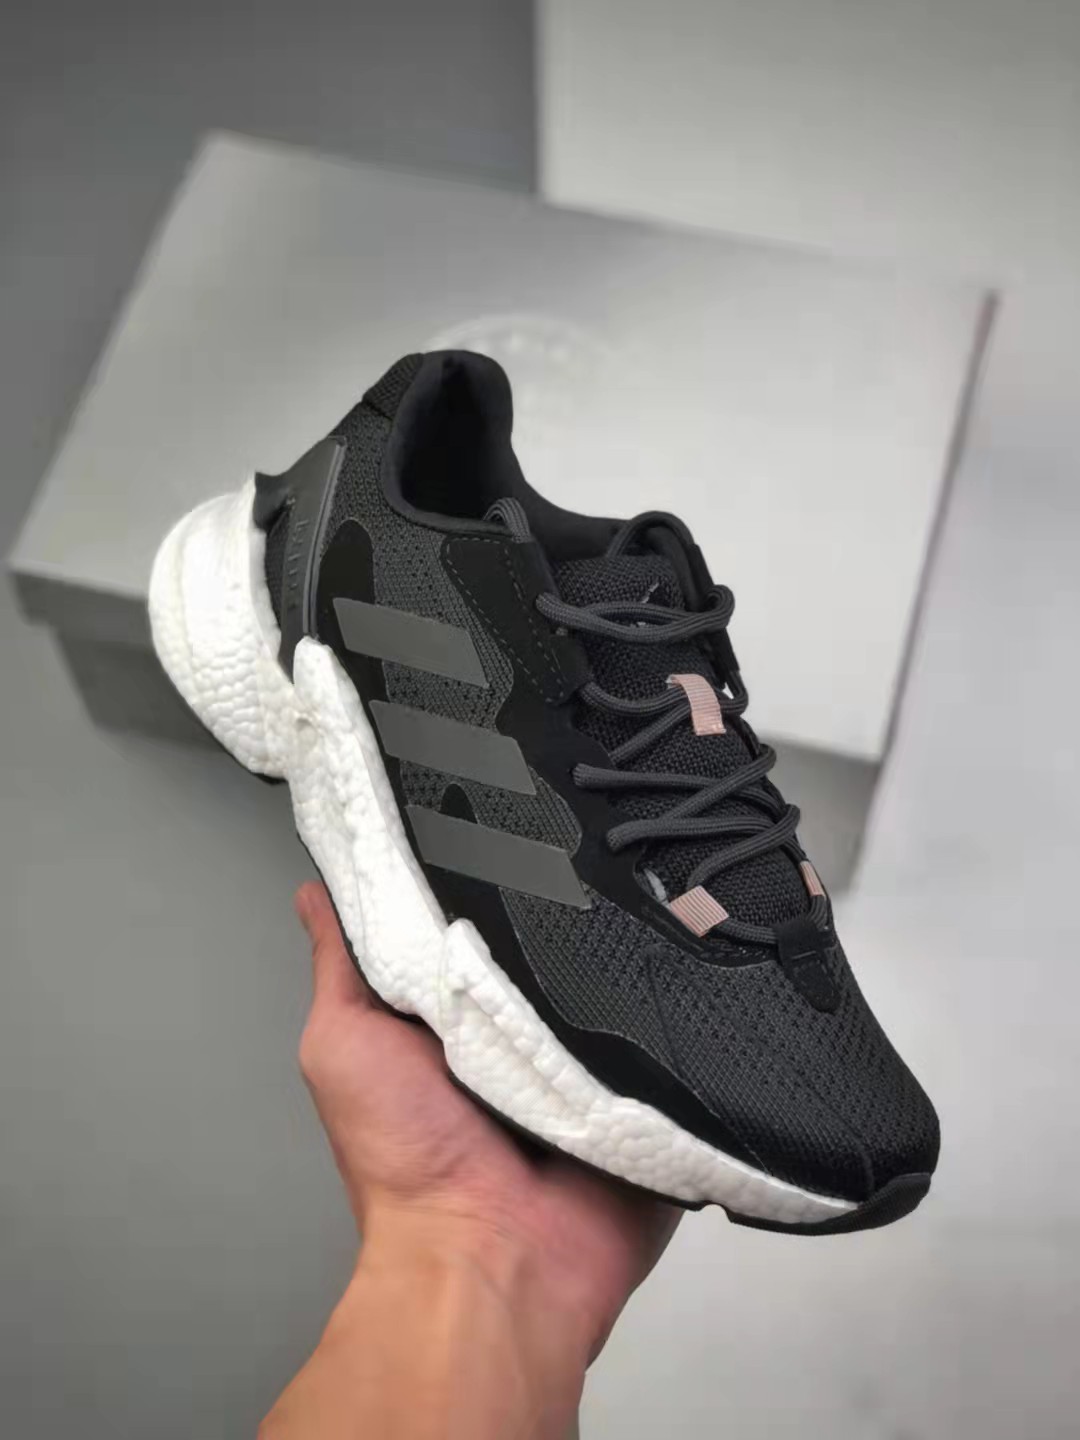 Adidas X9000l4 Black S23673 - Sleek and Stylish Footwear for Ultimate Performance